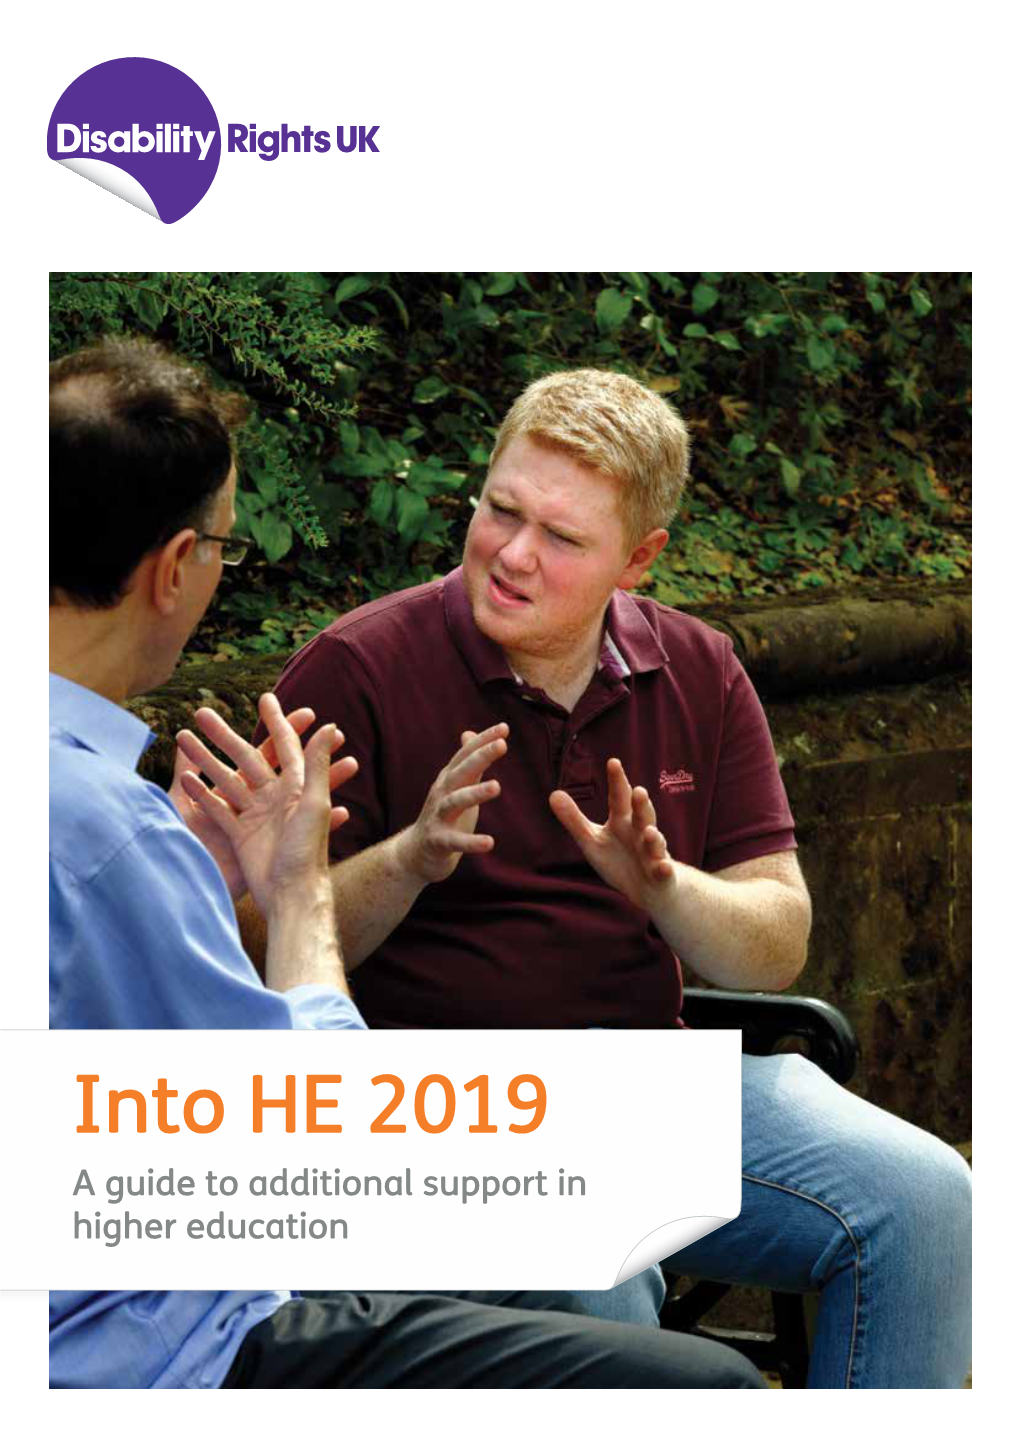 Into HE 2019 a Guide to Additional Support in Higher Education